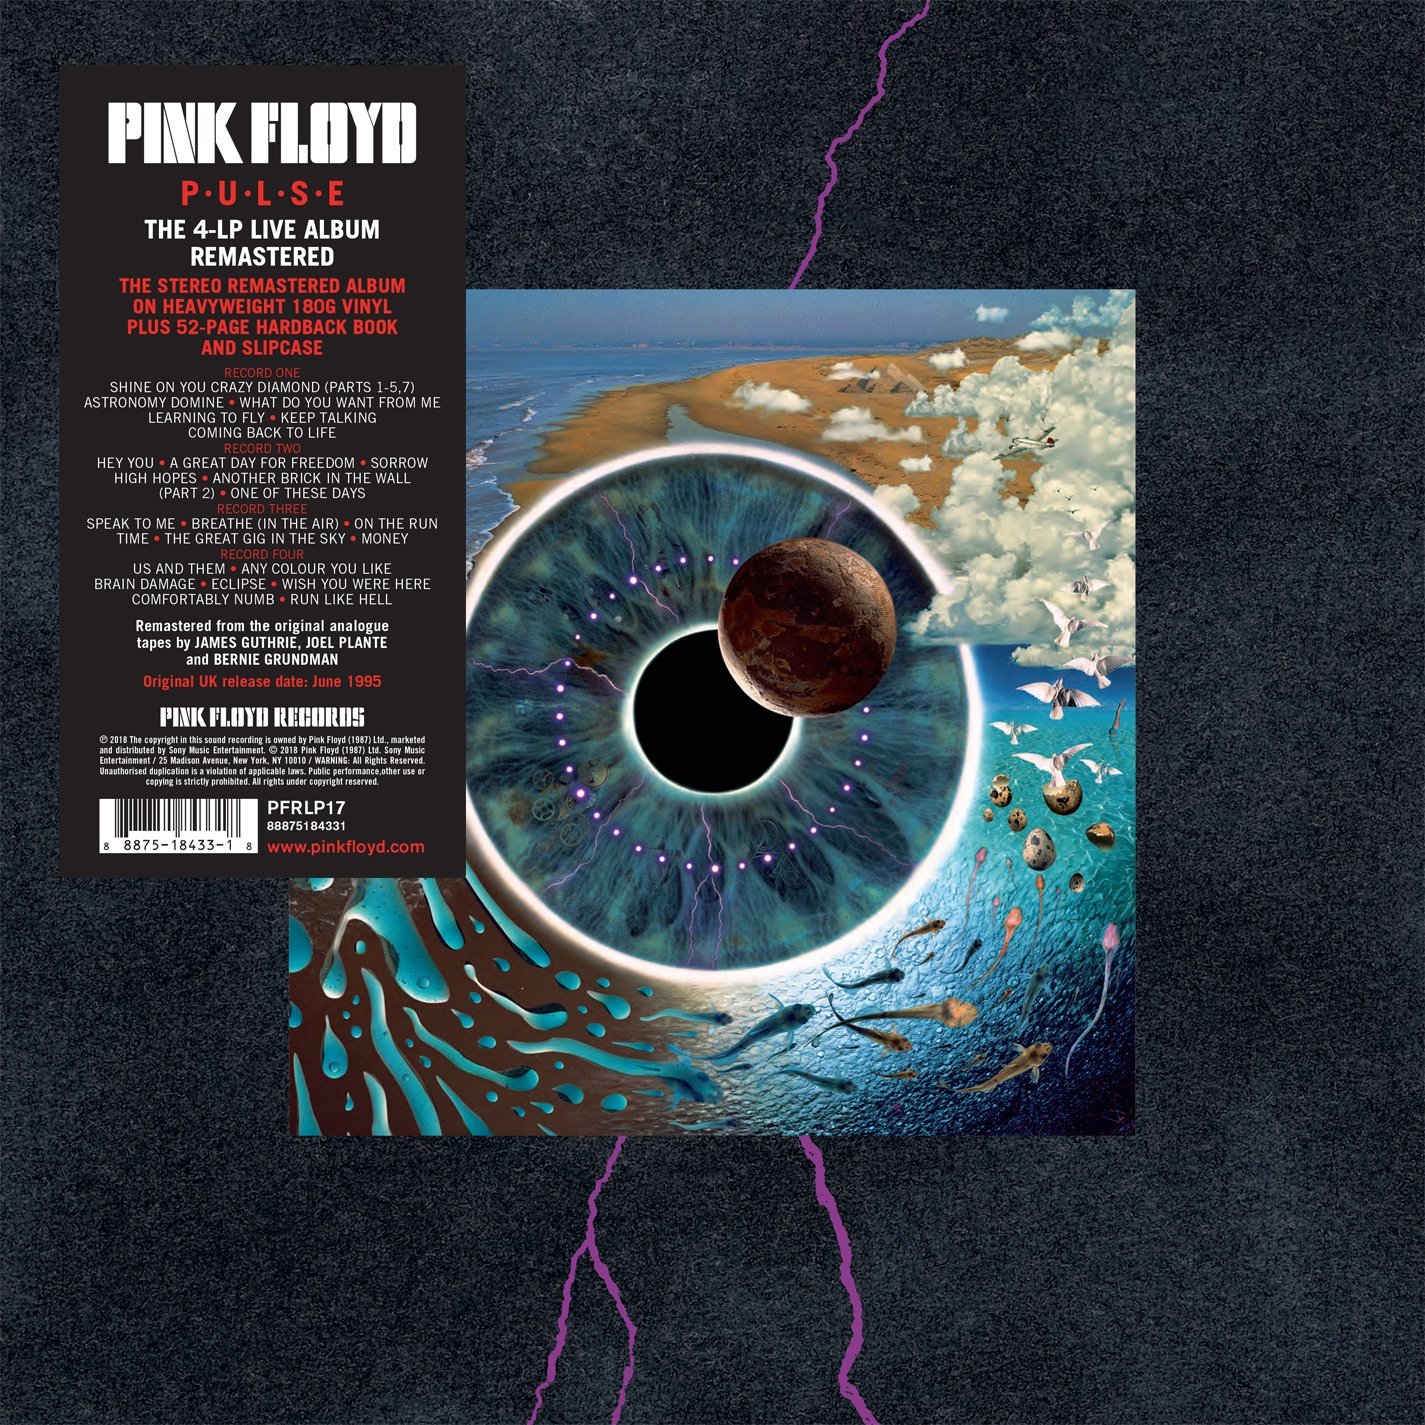 Pink Floyd’s 4-LP Live ‘Pulse’ Reissued | Best Classic Bands